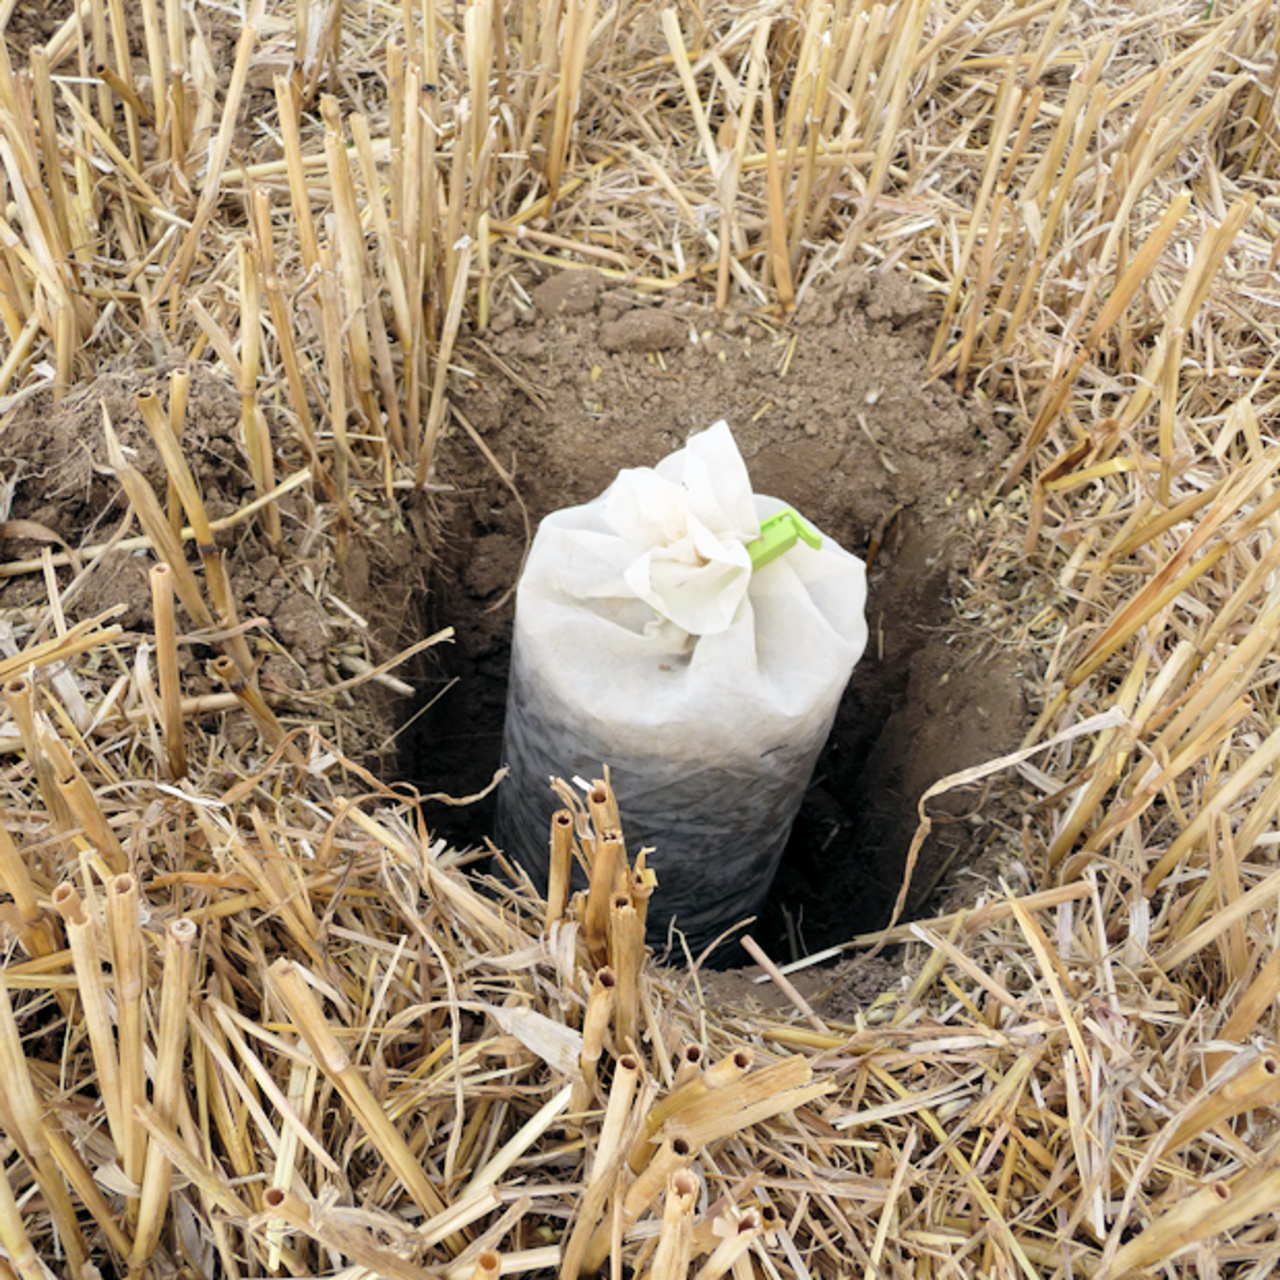 Soil mesocosm with Fusarium-infected straw and soil fauna in a mulched field